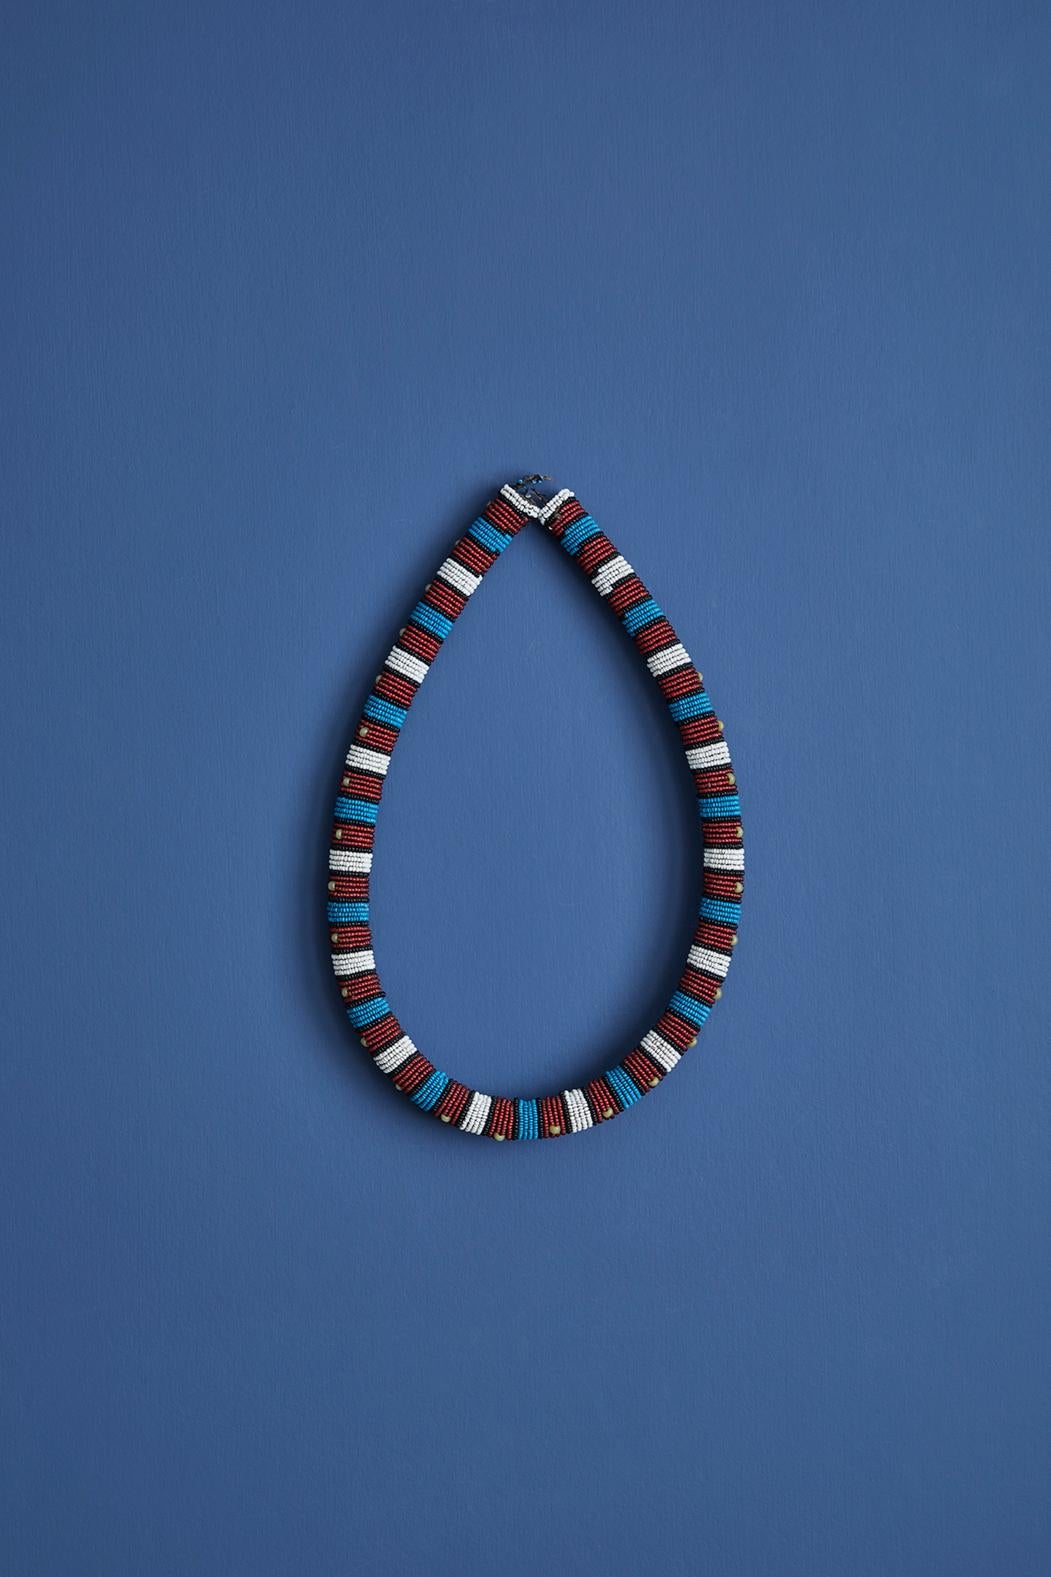 South African Zulu beaded collar necklace from the early 20th century. 

The collar measures 80 cm long and 2.2 cm in diameter. 

Zulu beadwork has a long history as beads were traded first by Arabs and later Europeans in exchange for ivory,